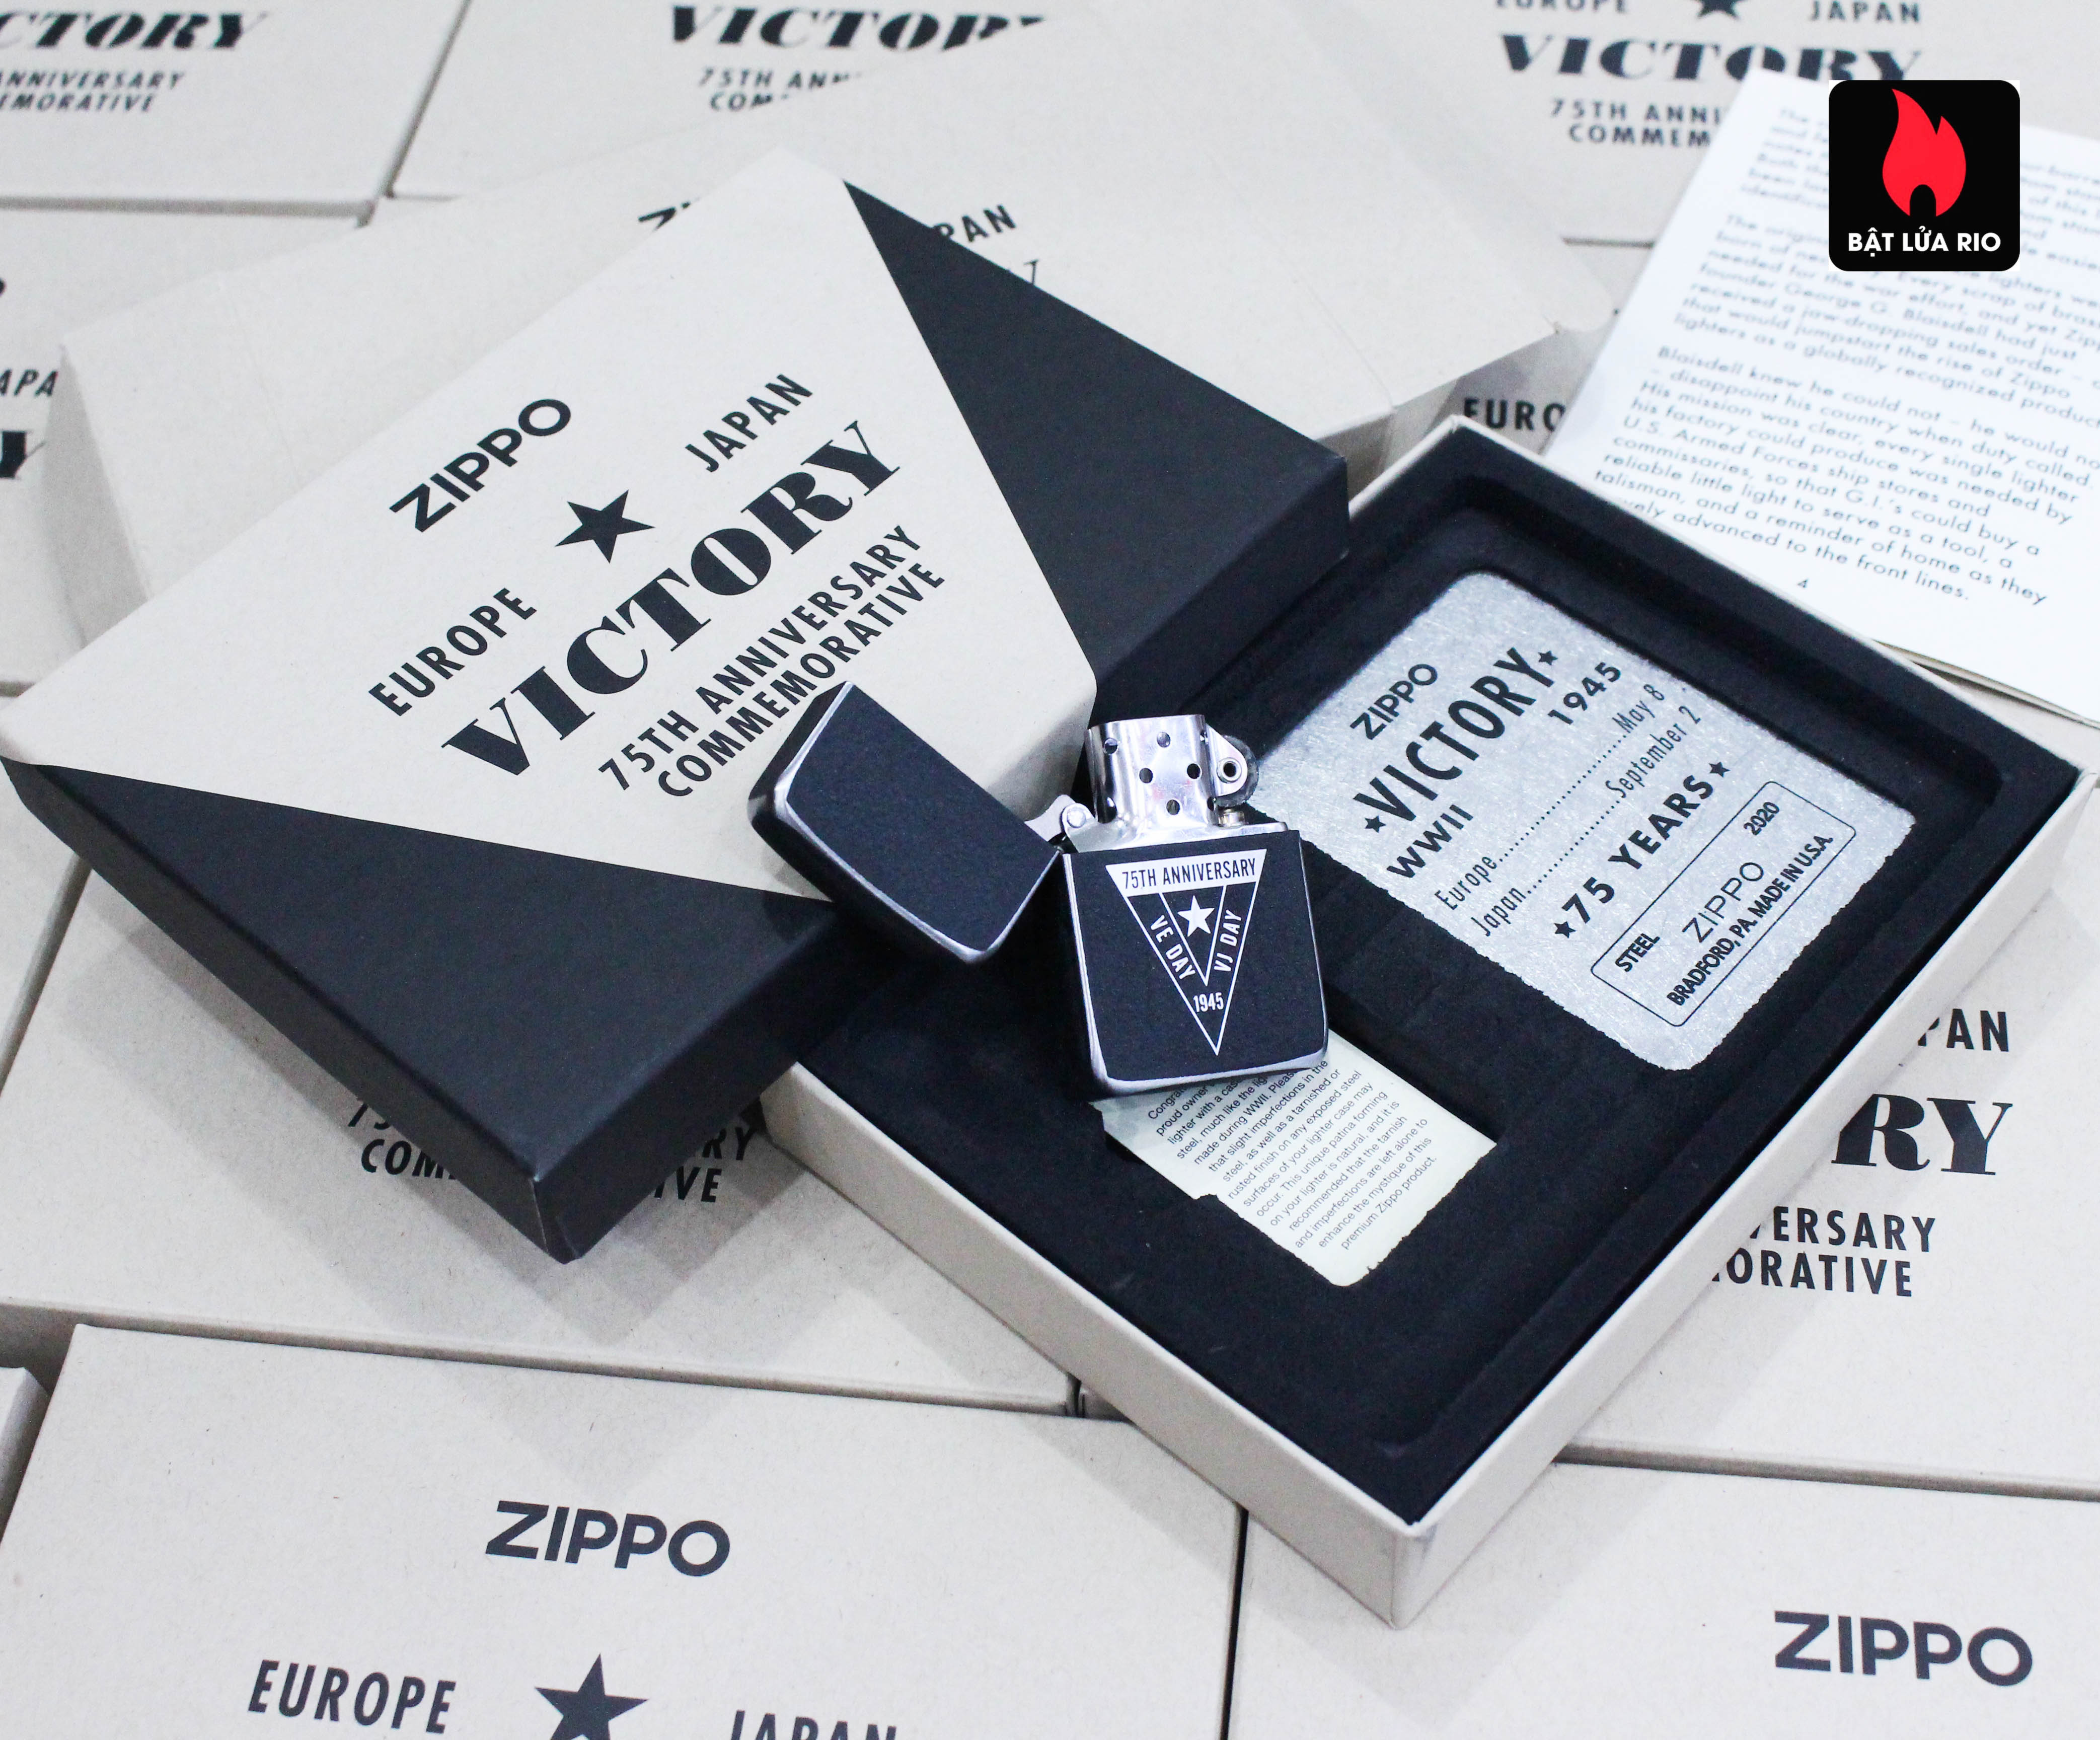 Zippo VE/VJ 75th Anniversary Collectible Steel Case - Zippo Victory in Europe & Japan Collectible Lighter - Zippo 49264 45